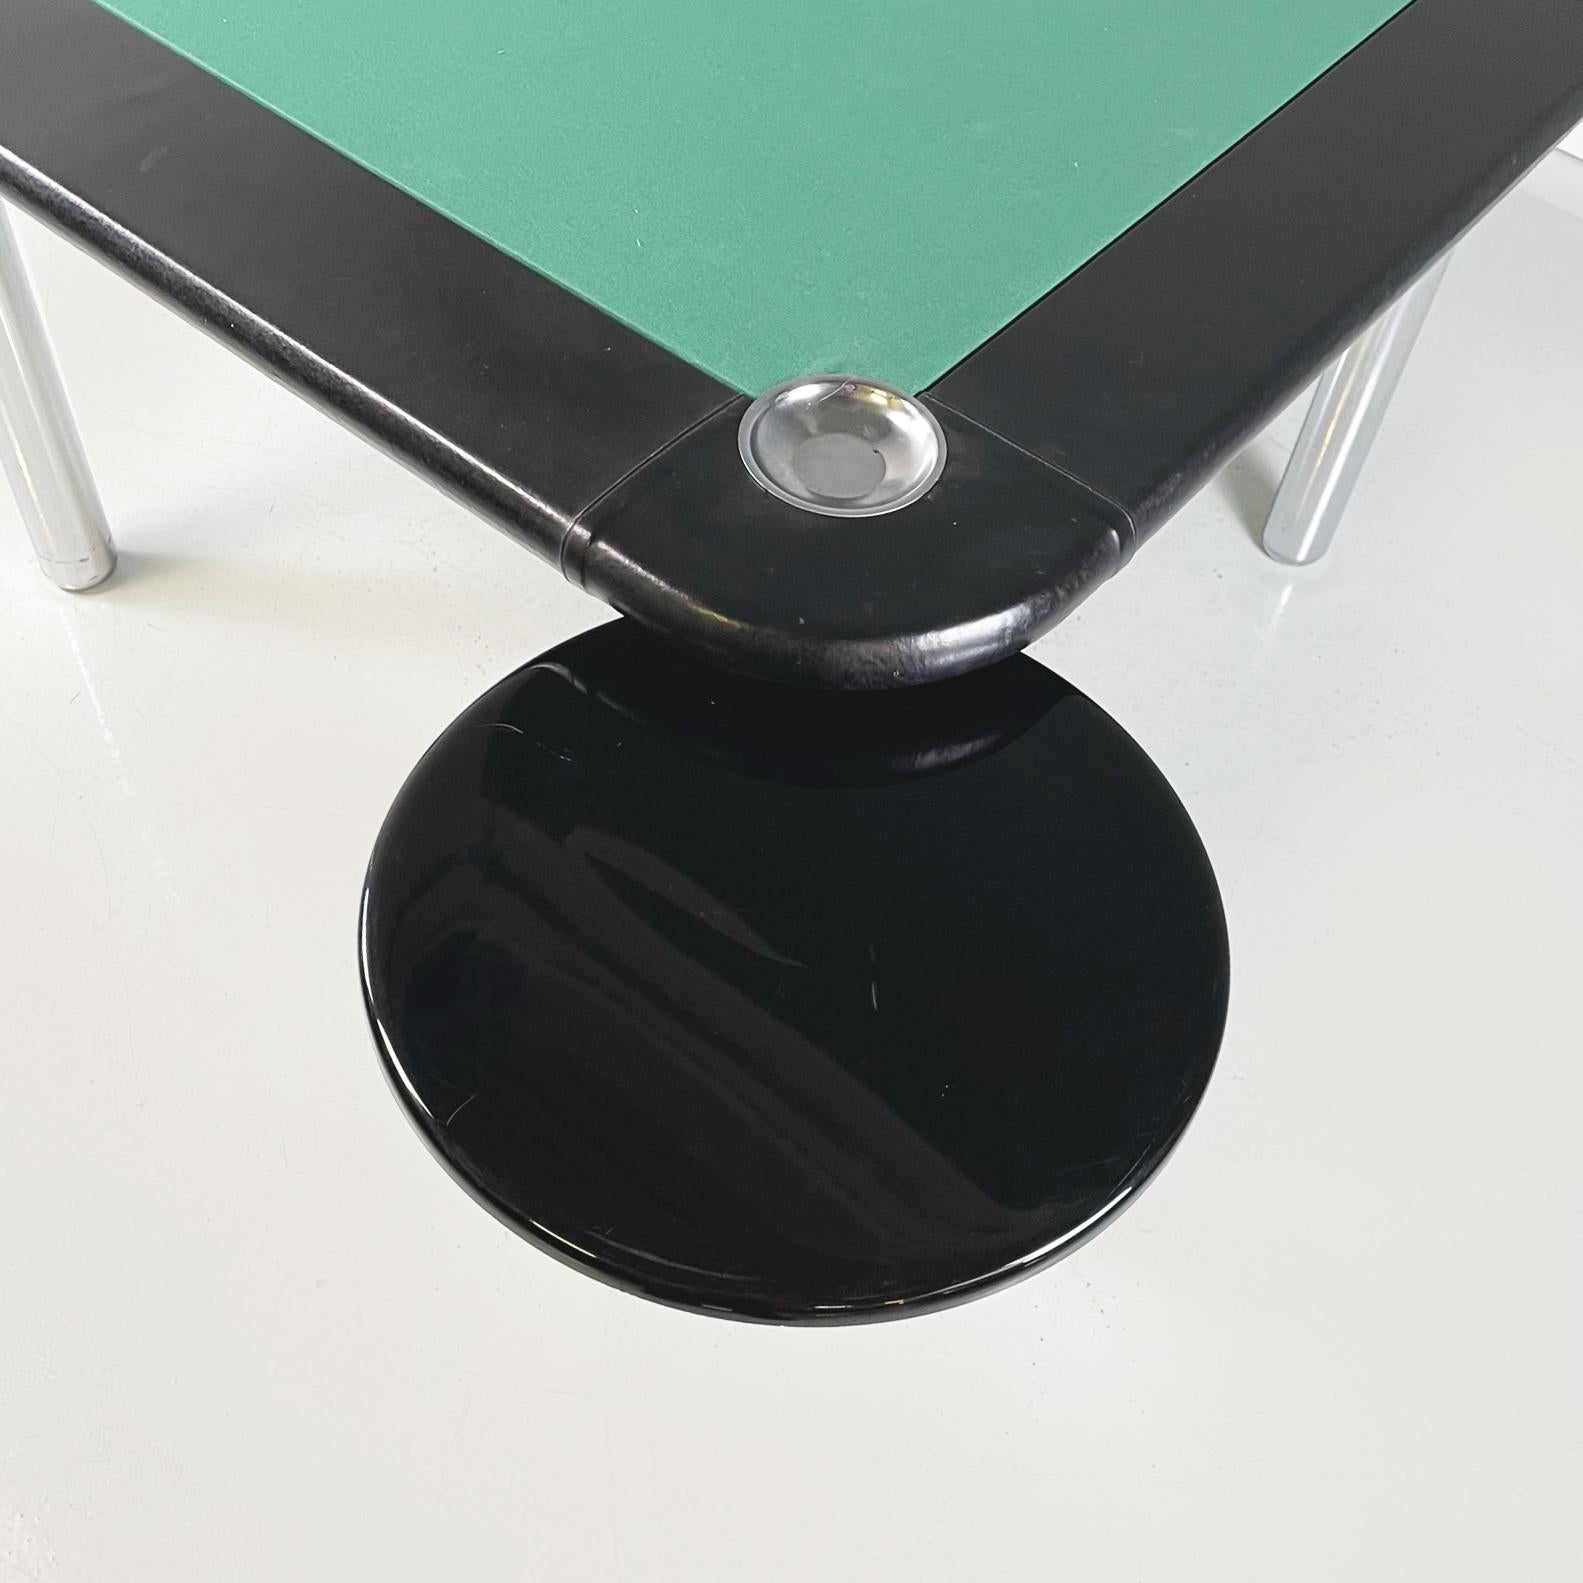 Italian Modern Game Table in Green Fabric Black Leather and Chromed Steel, 1970s For Sale 2